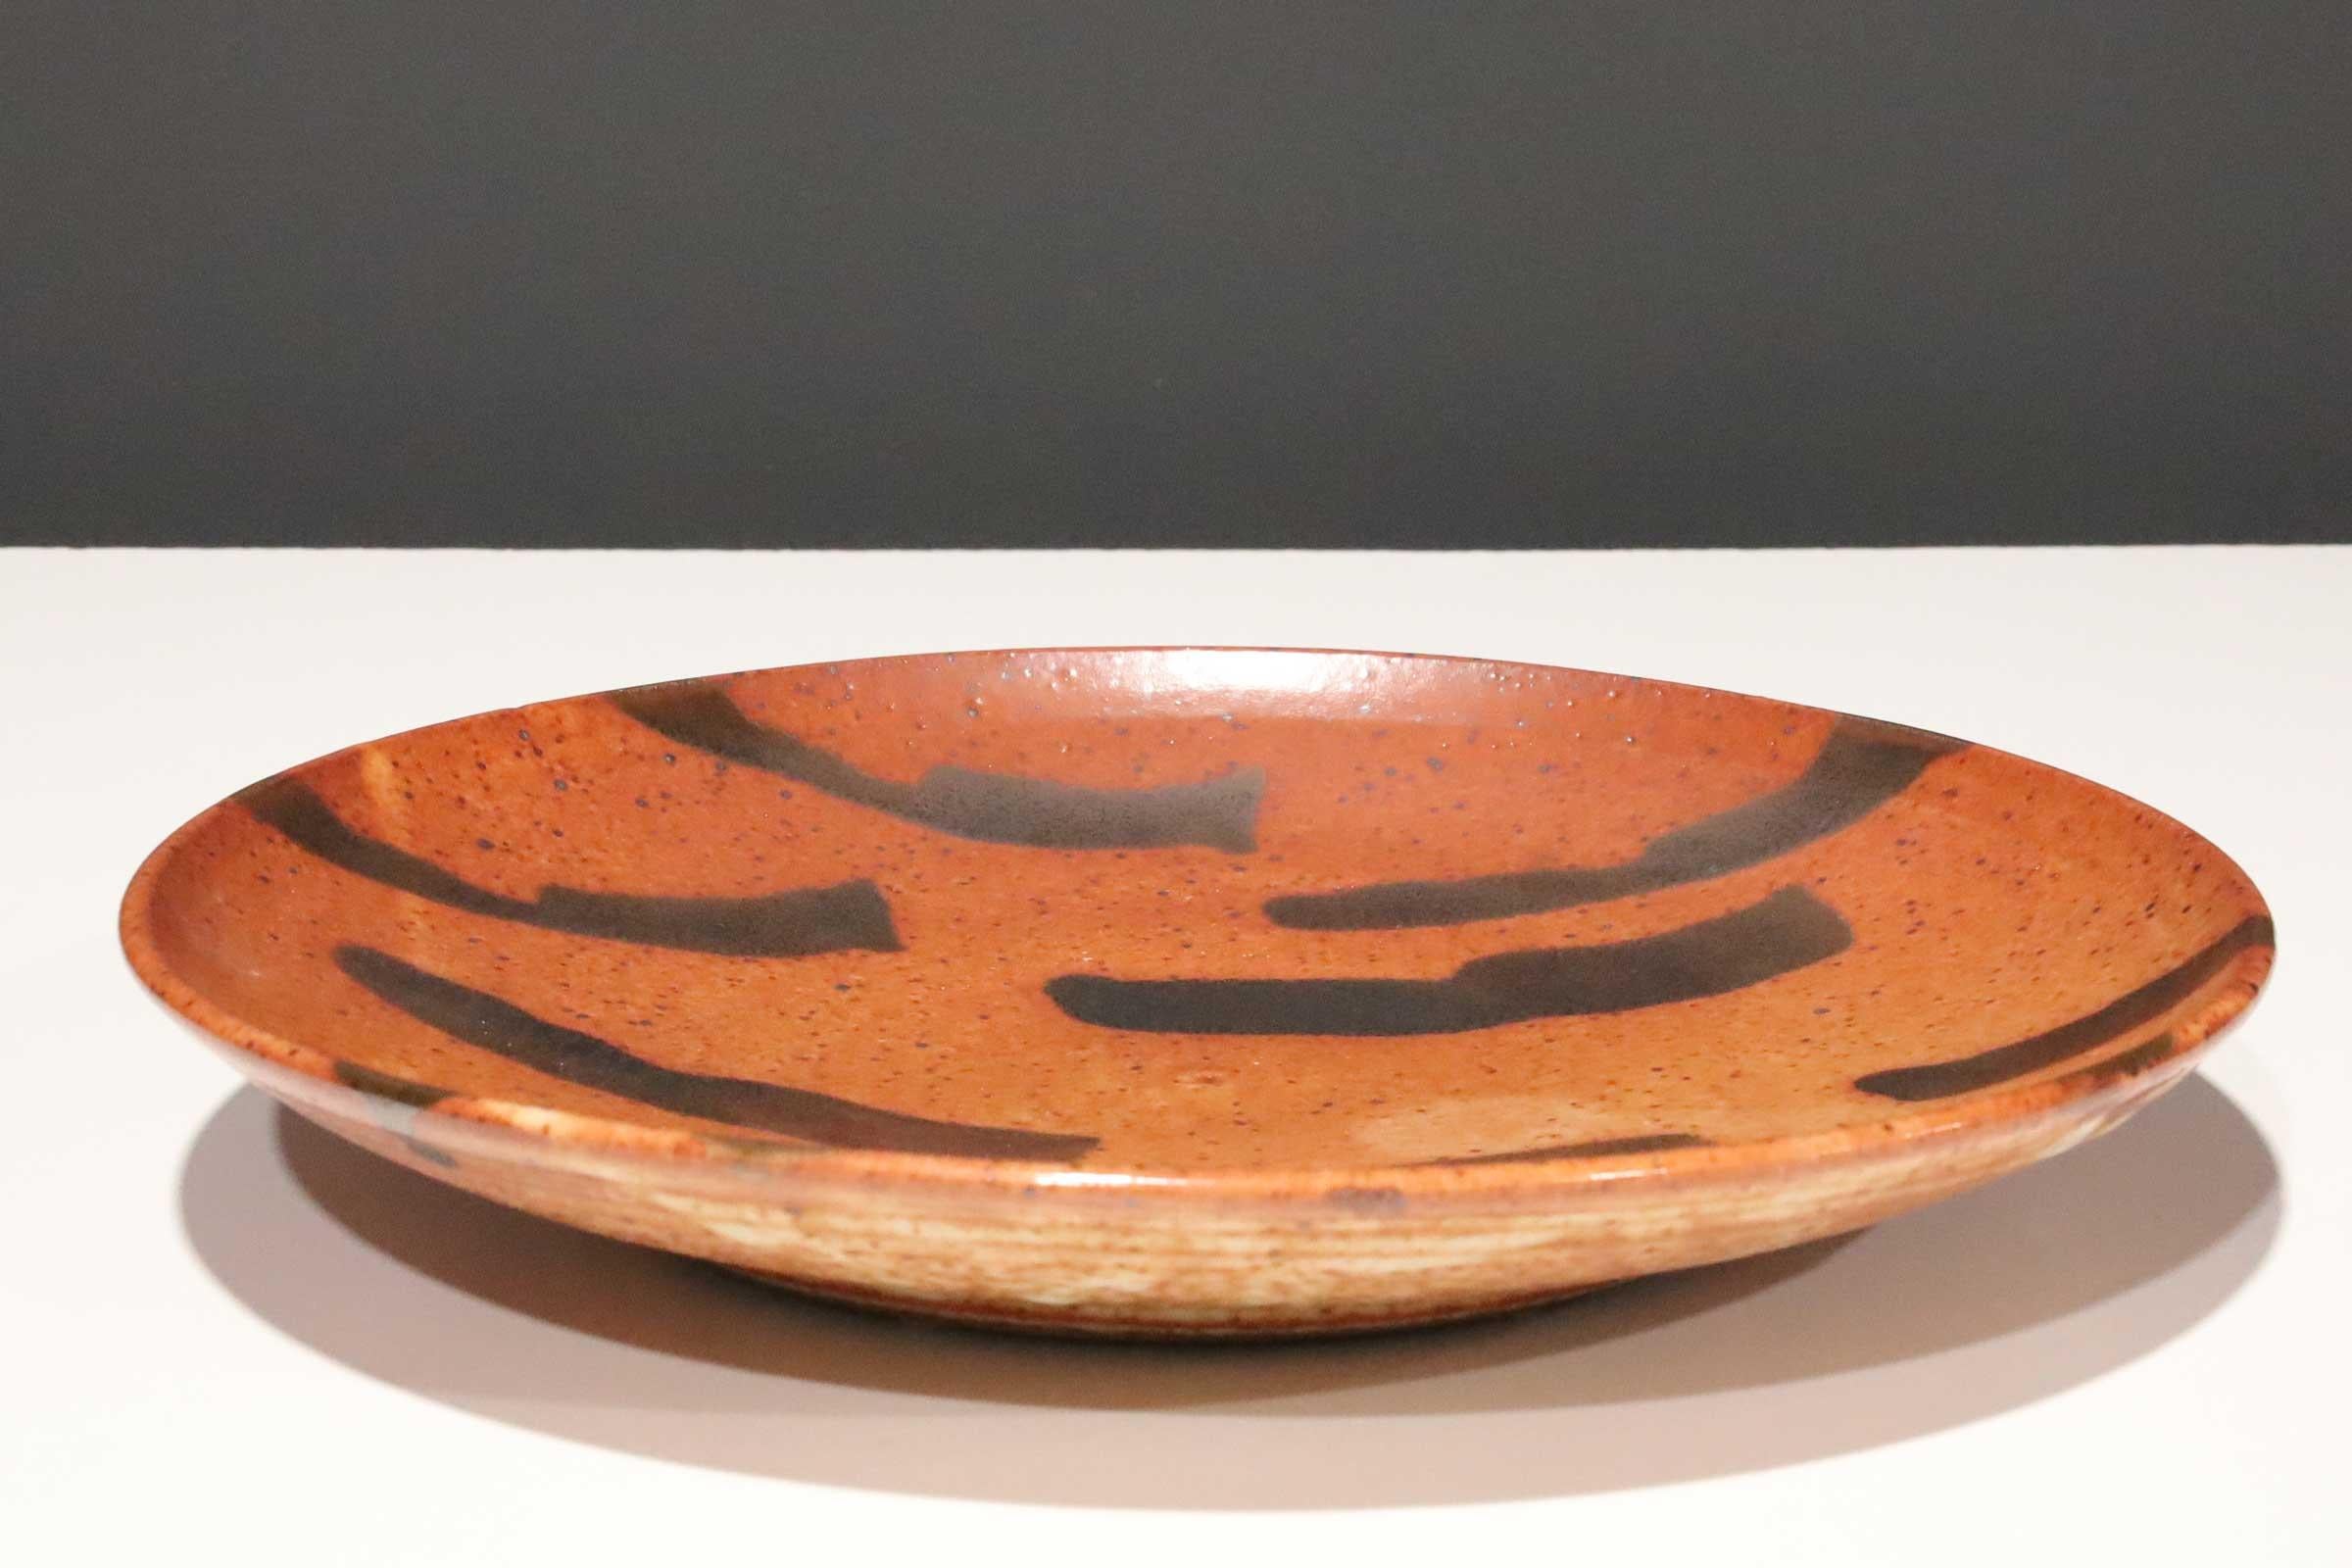 Large studio pottery platter with a red glaze and brown decorative dashes. 

Warren MacKenzie is known for simple, wheel-thrown functional pottery influenced by Bernard Leach and the Japanese aesthetic of the work of Shoji Hamada.

In 1950